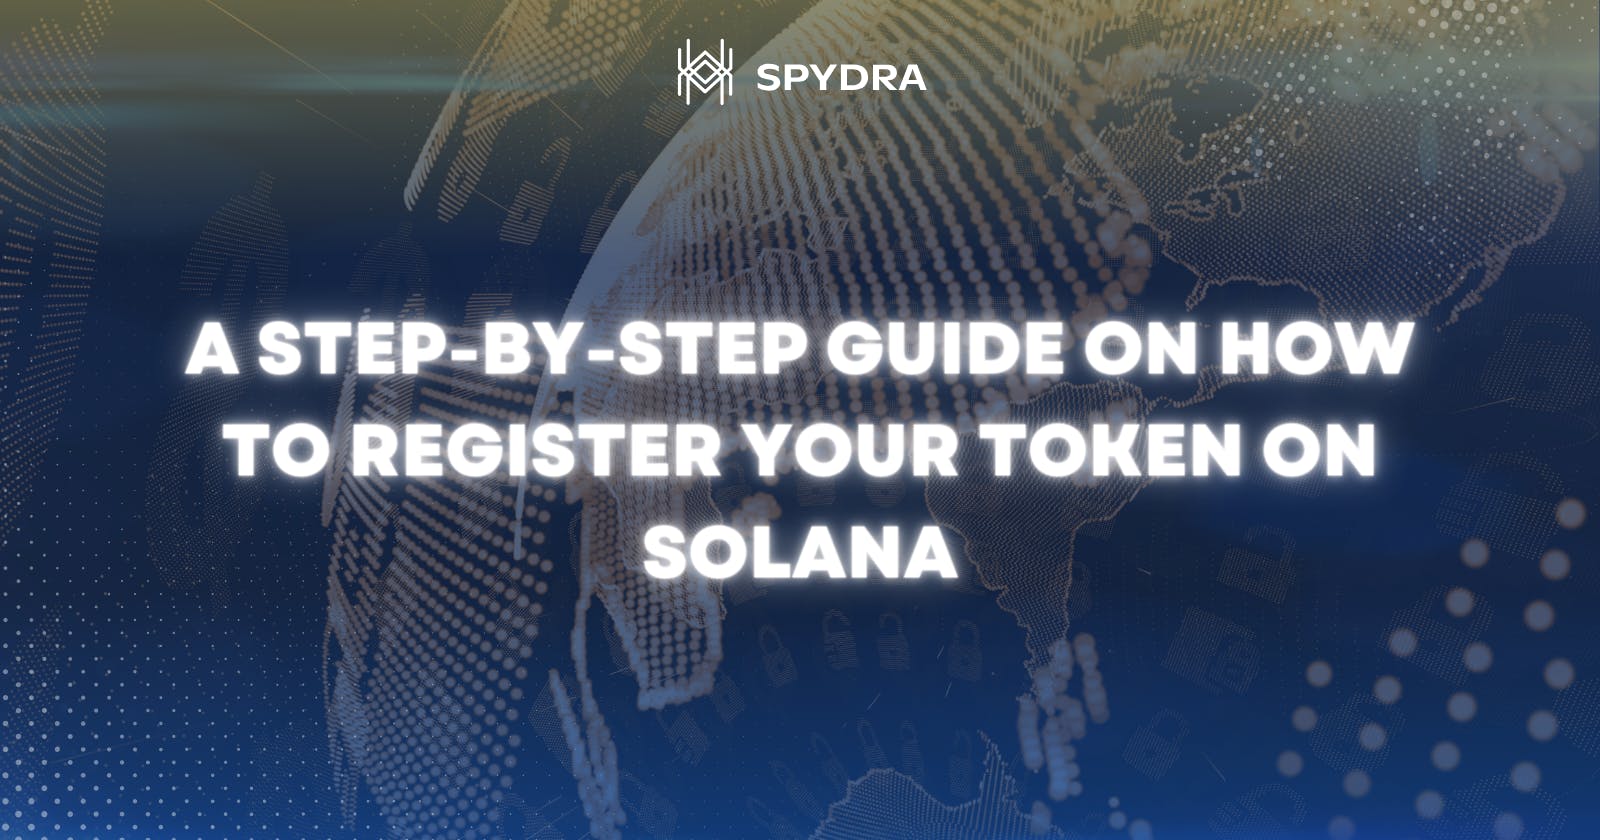 A Step-by-Step Guide on How to Register Your Token on Solana